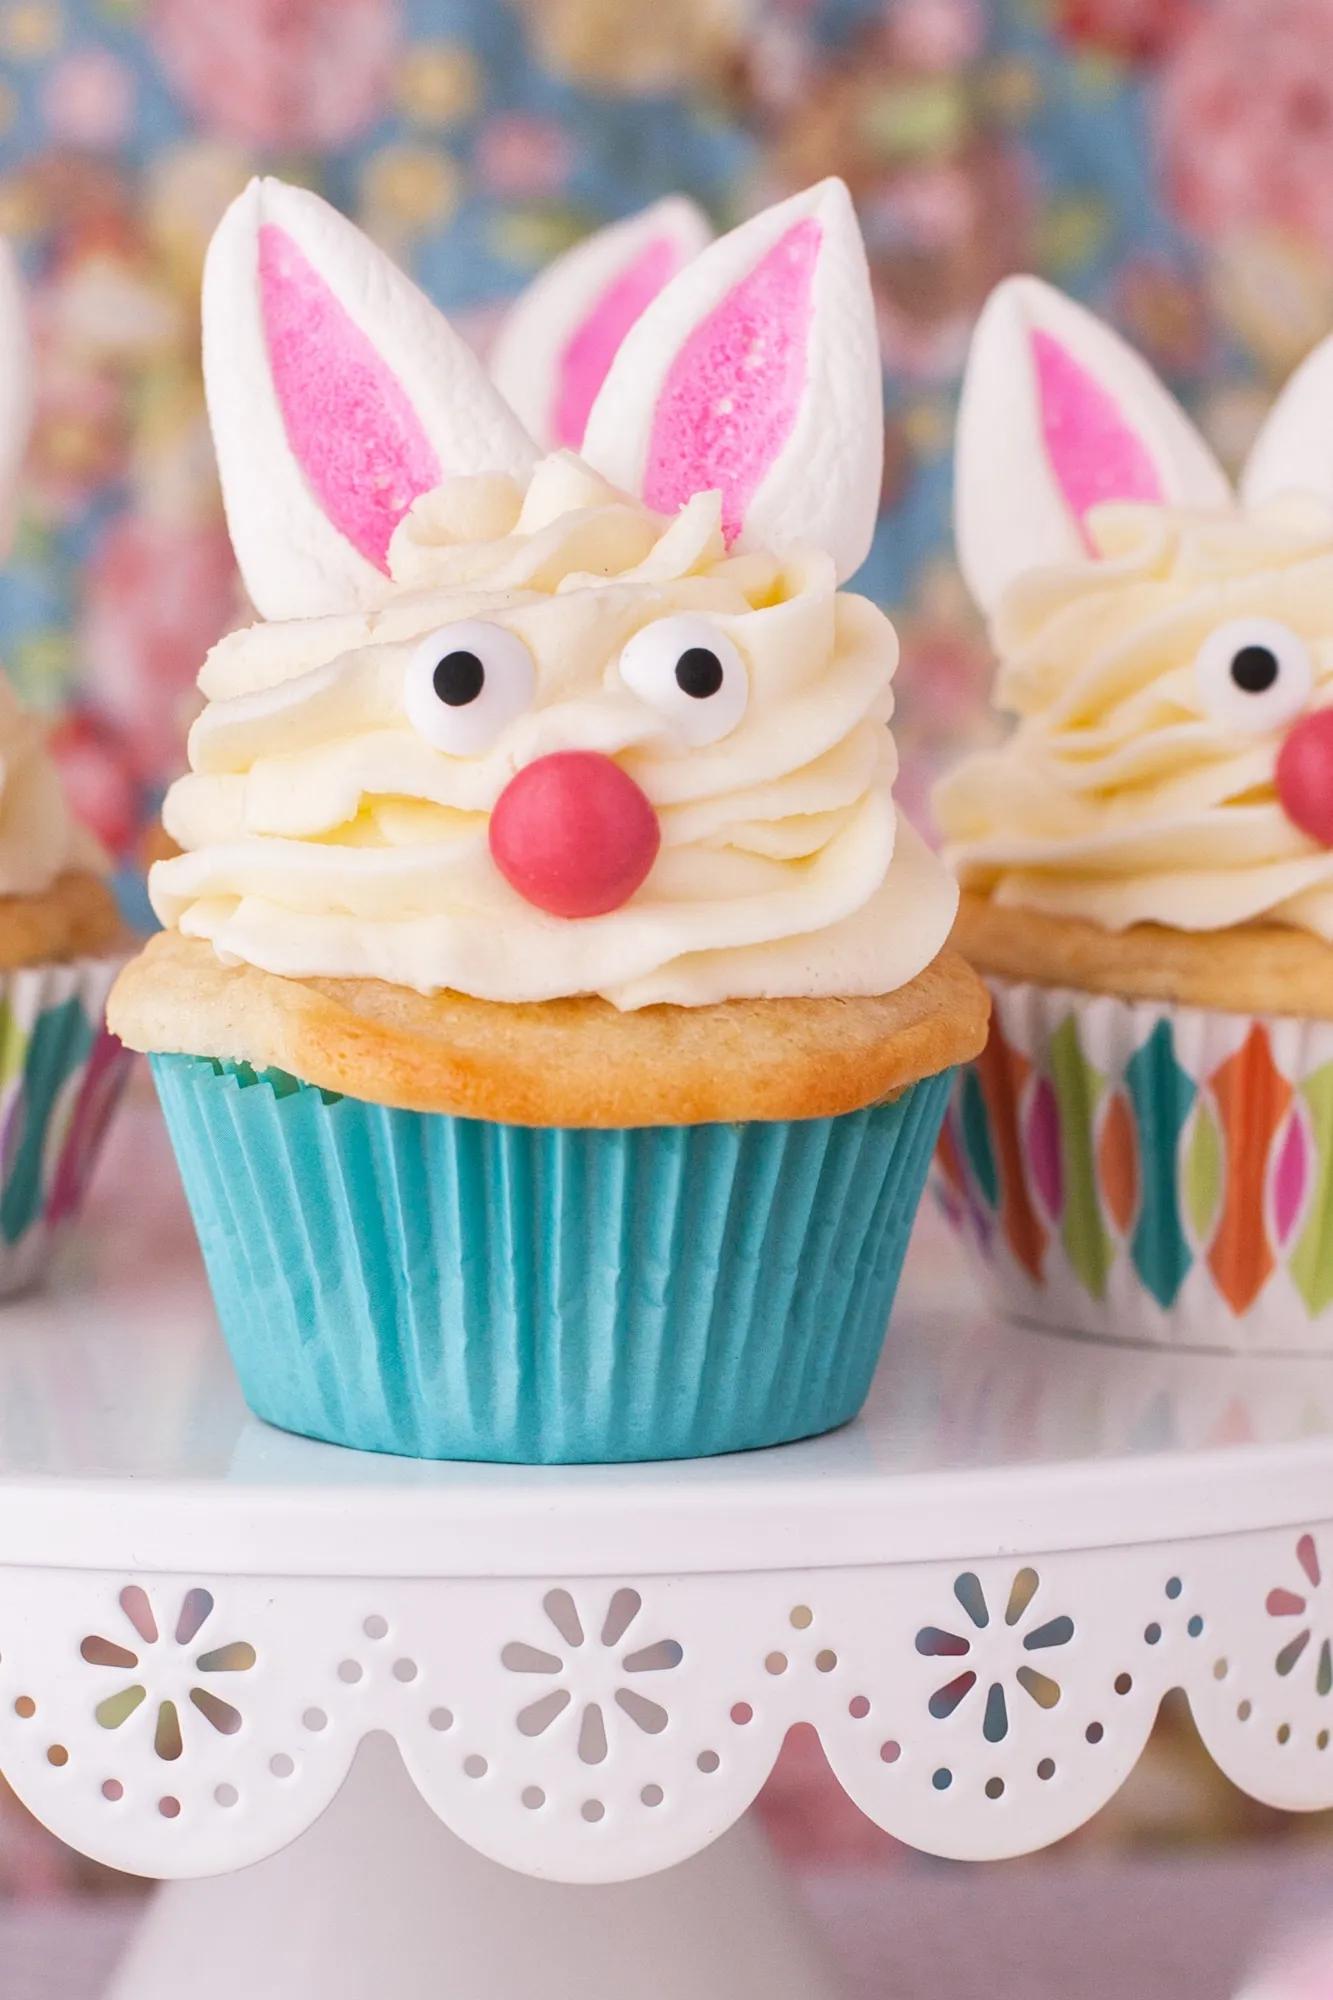 Marshmallow Bunny Cupcakes for Easter - Eating Richly